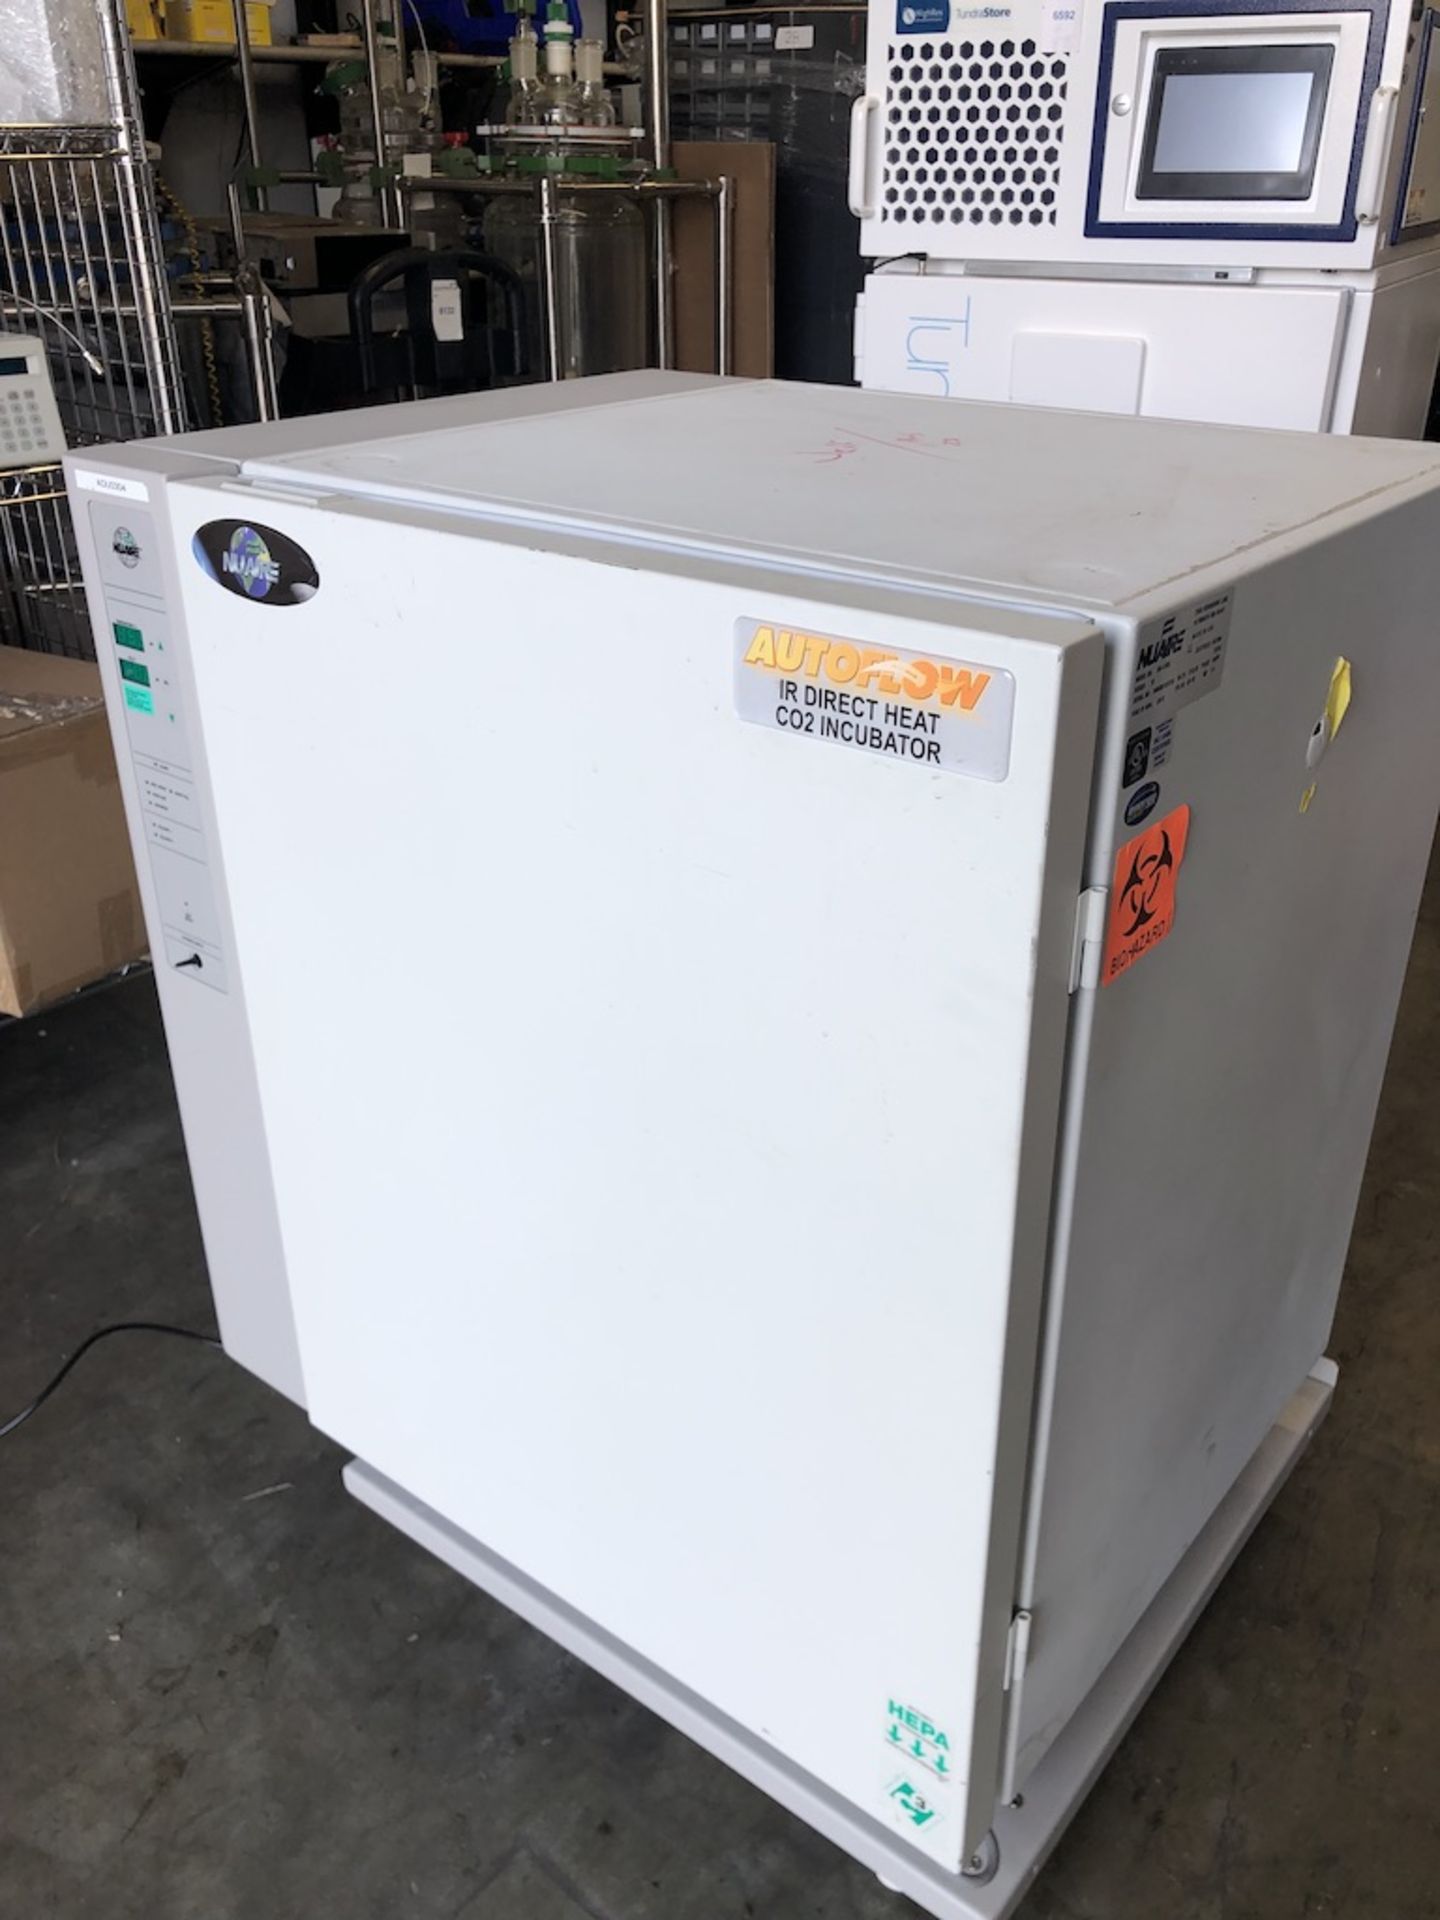 NUAIRE NU-4750 WATER JACKETED CO2 INCUBATOR SERIES 10, 115 AC, 60Hz - Image 7 of 15